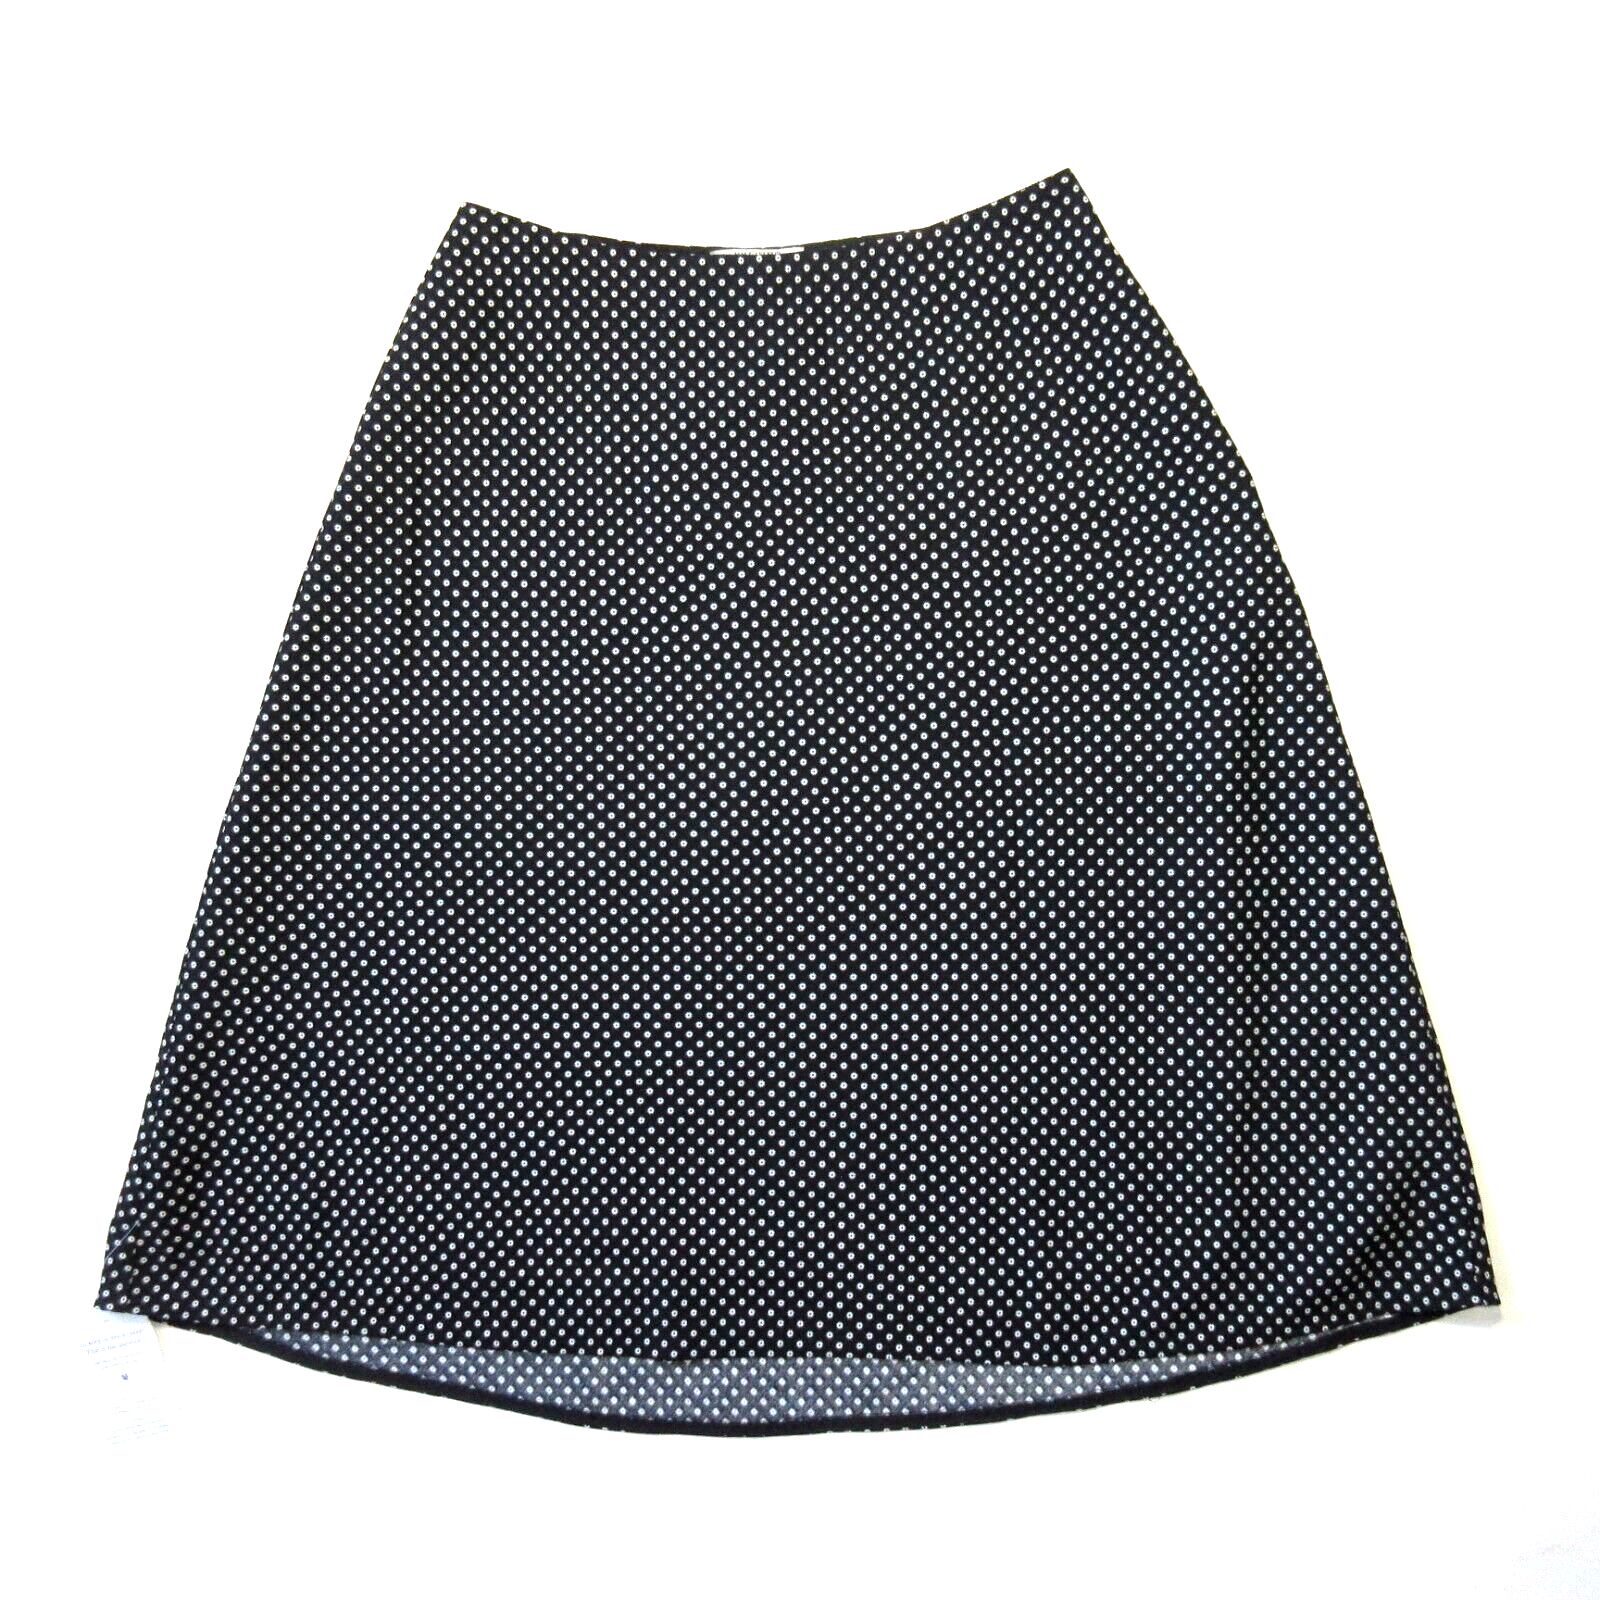 Primary image for NWT MM. Lafleur Suffolk in Black Ivory Checker Print A-line Flare Skirt 4 $165